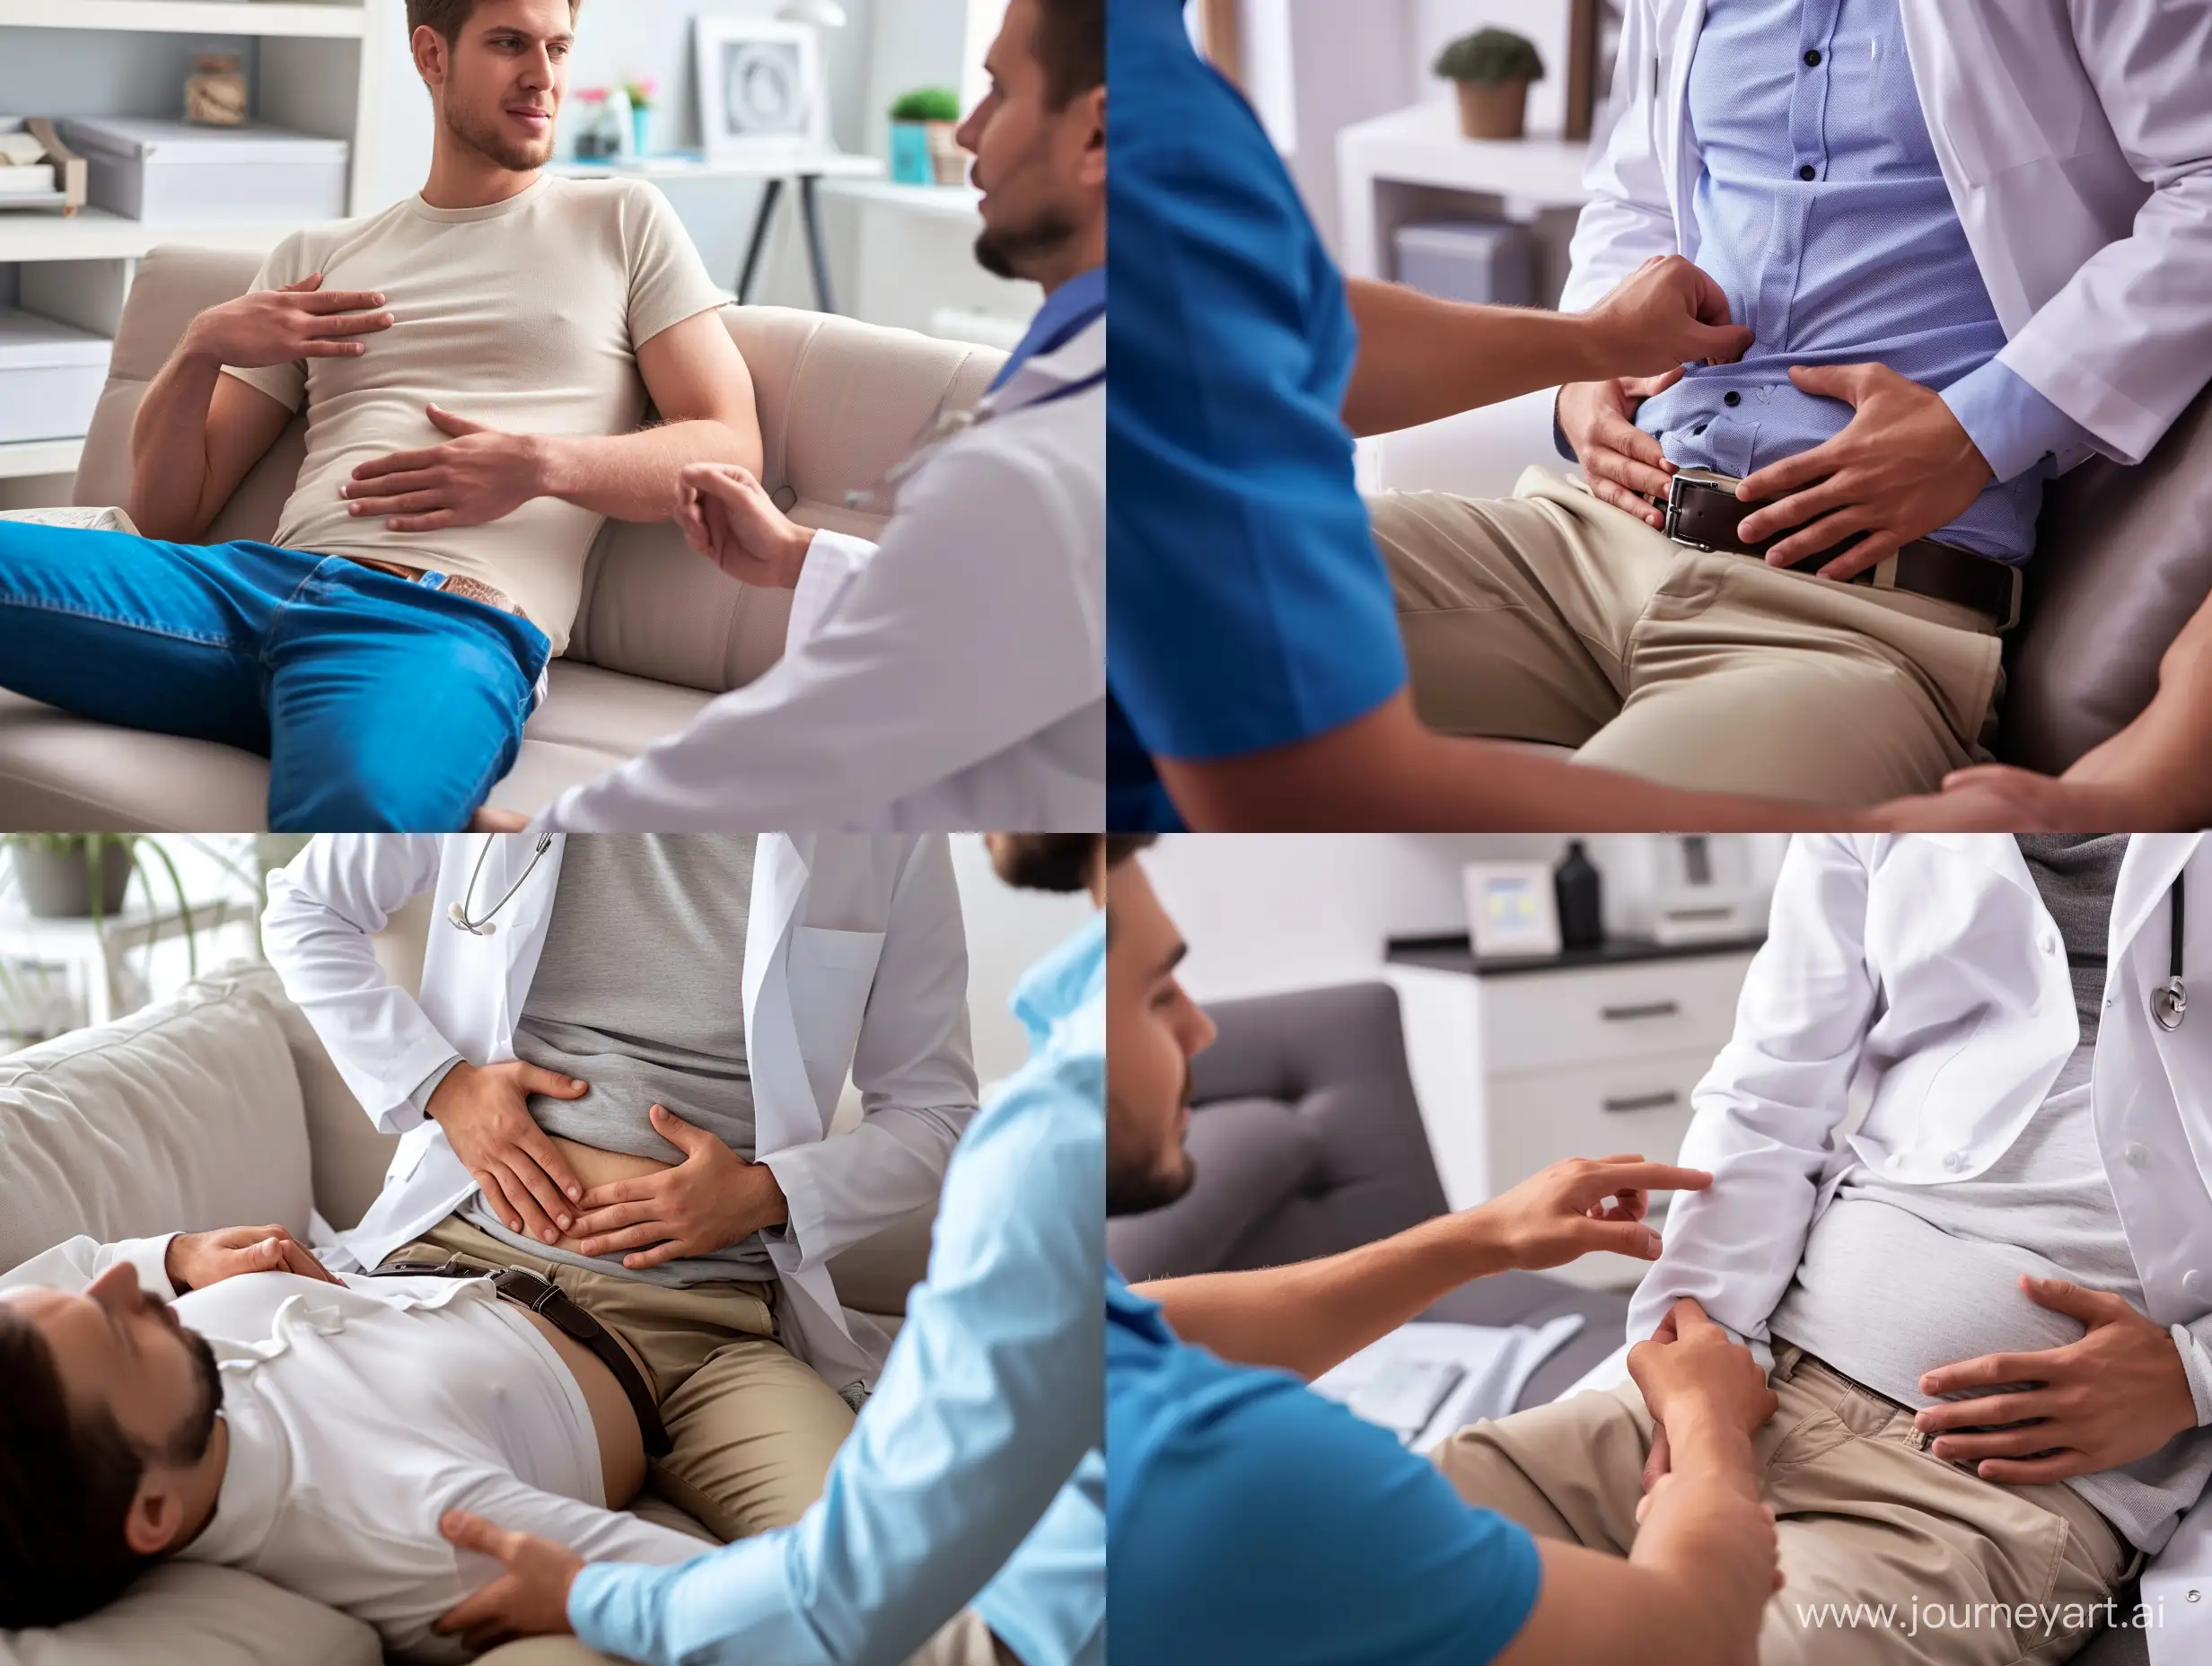 The doctor performs palpation of the abdomen of a male patient who is lying on a couch in the office, a high degree of detail of the skin and fingers